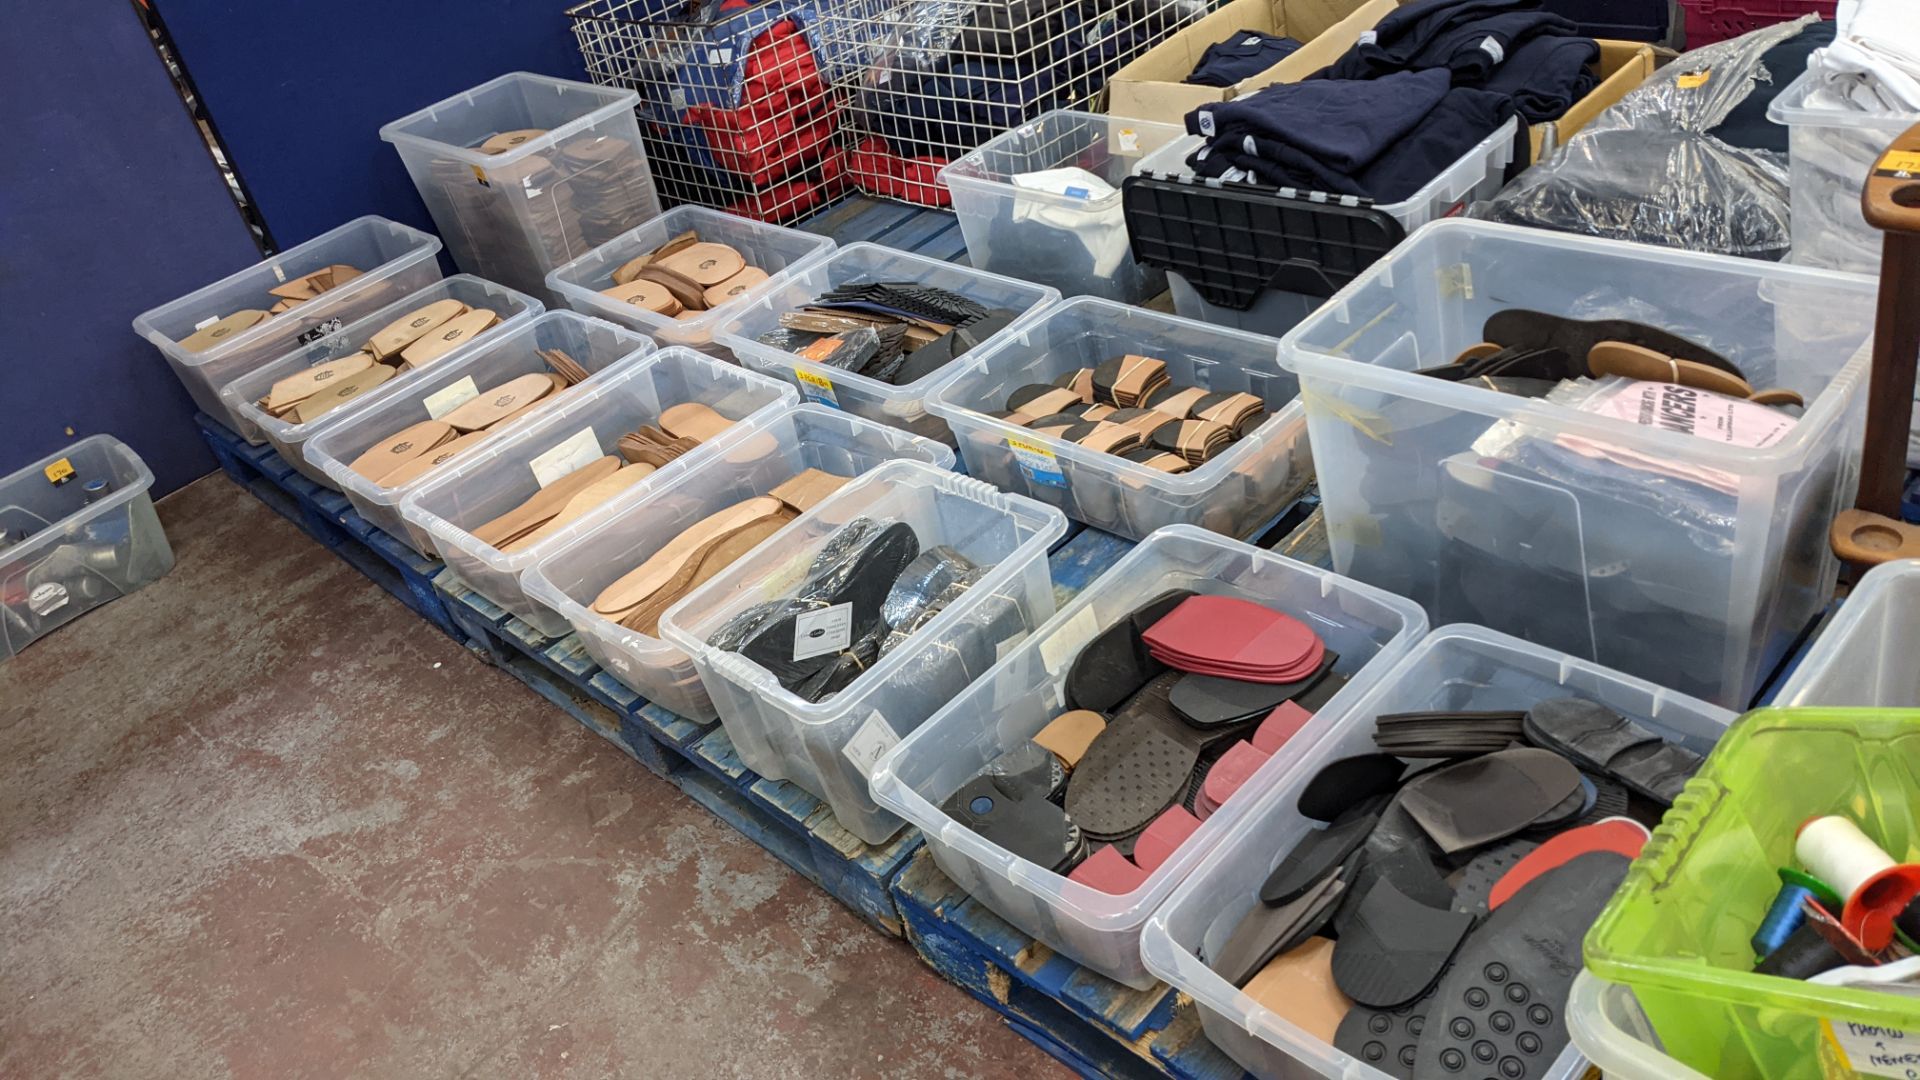 The contents of 13 crates of leather & rubber shoe soles & heels - crates excluded